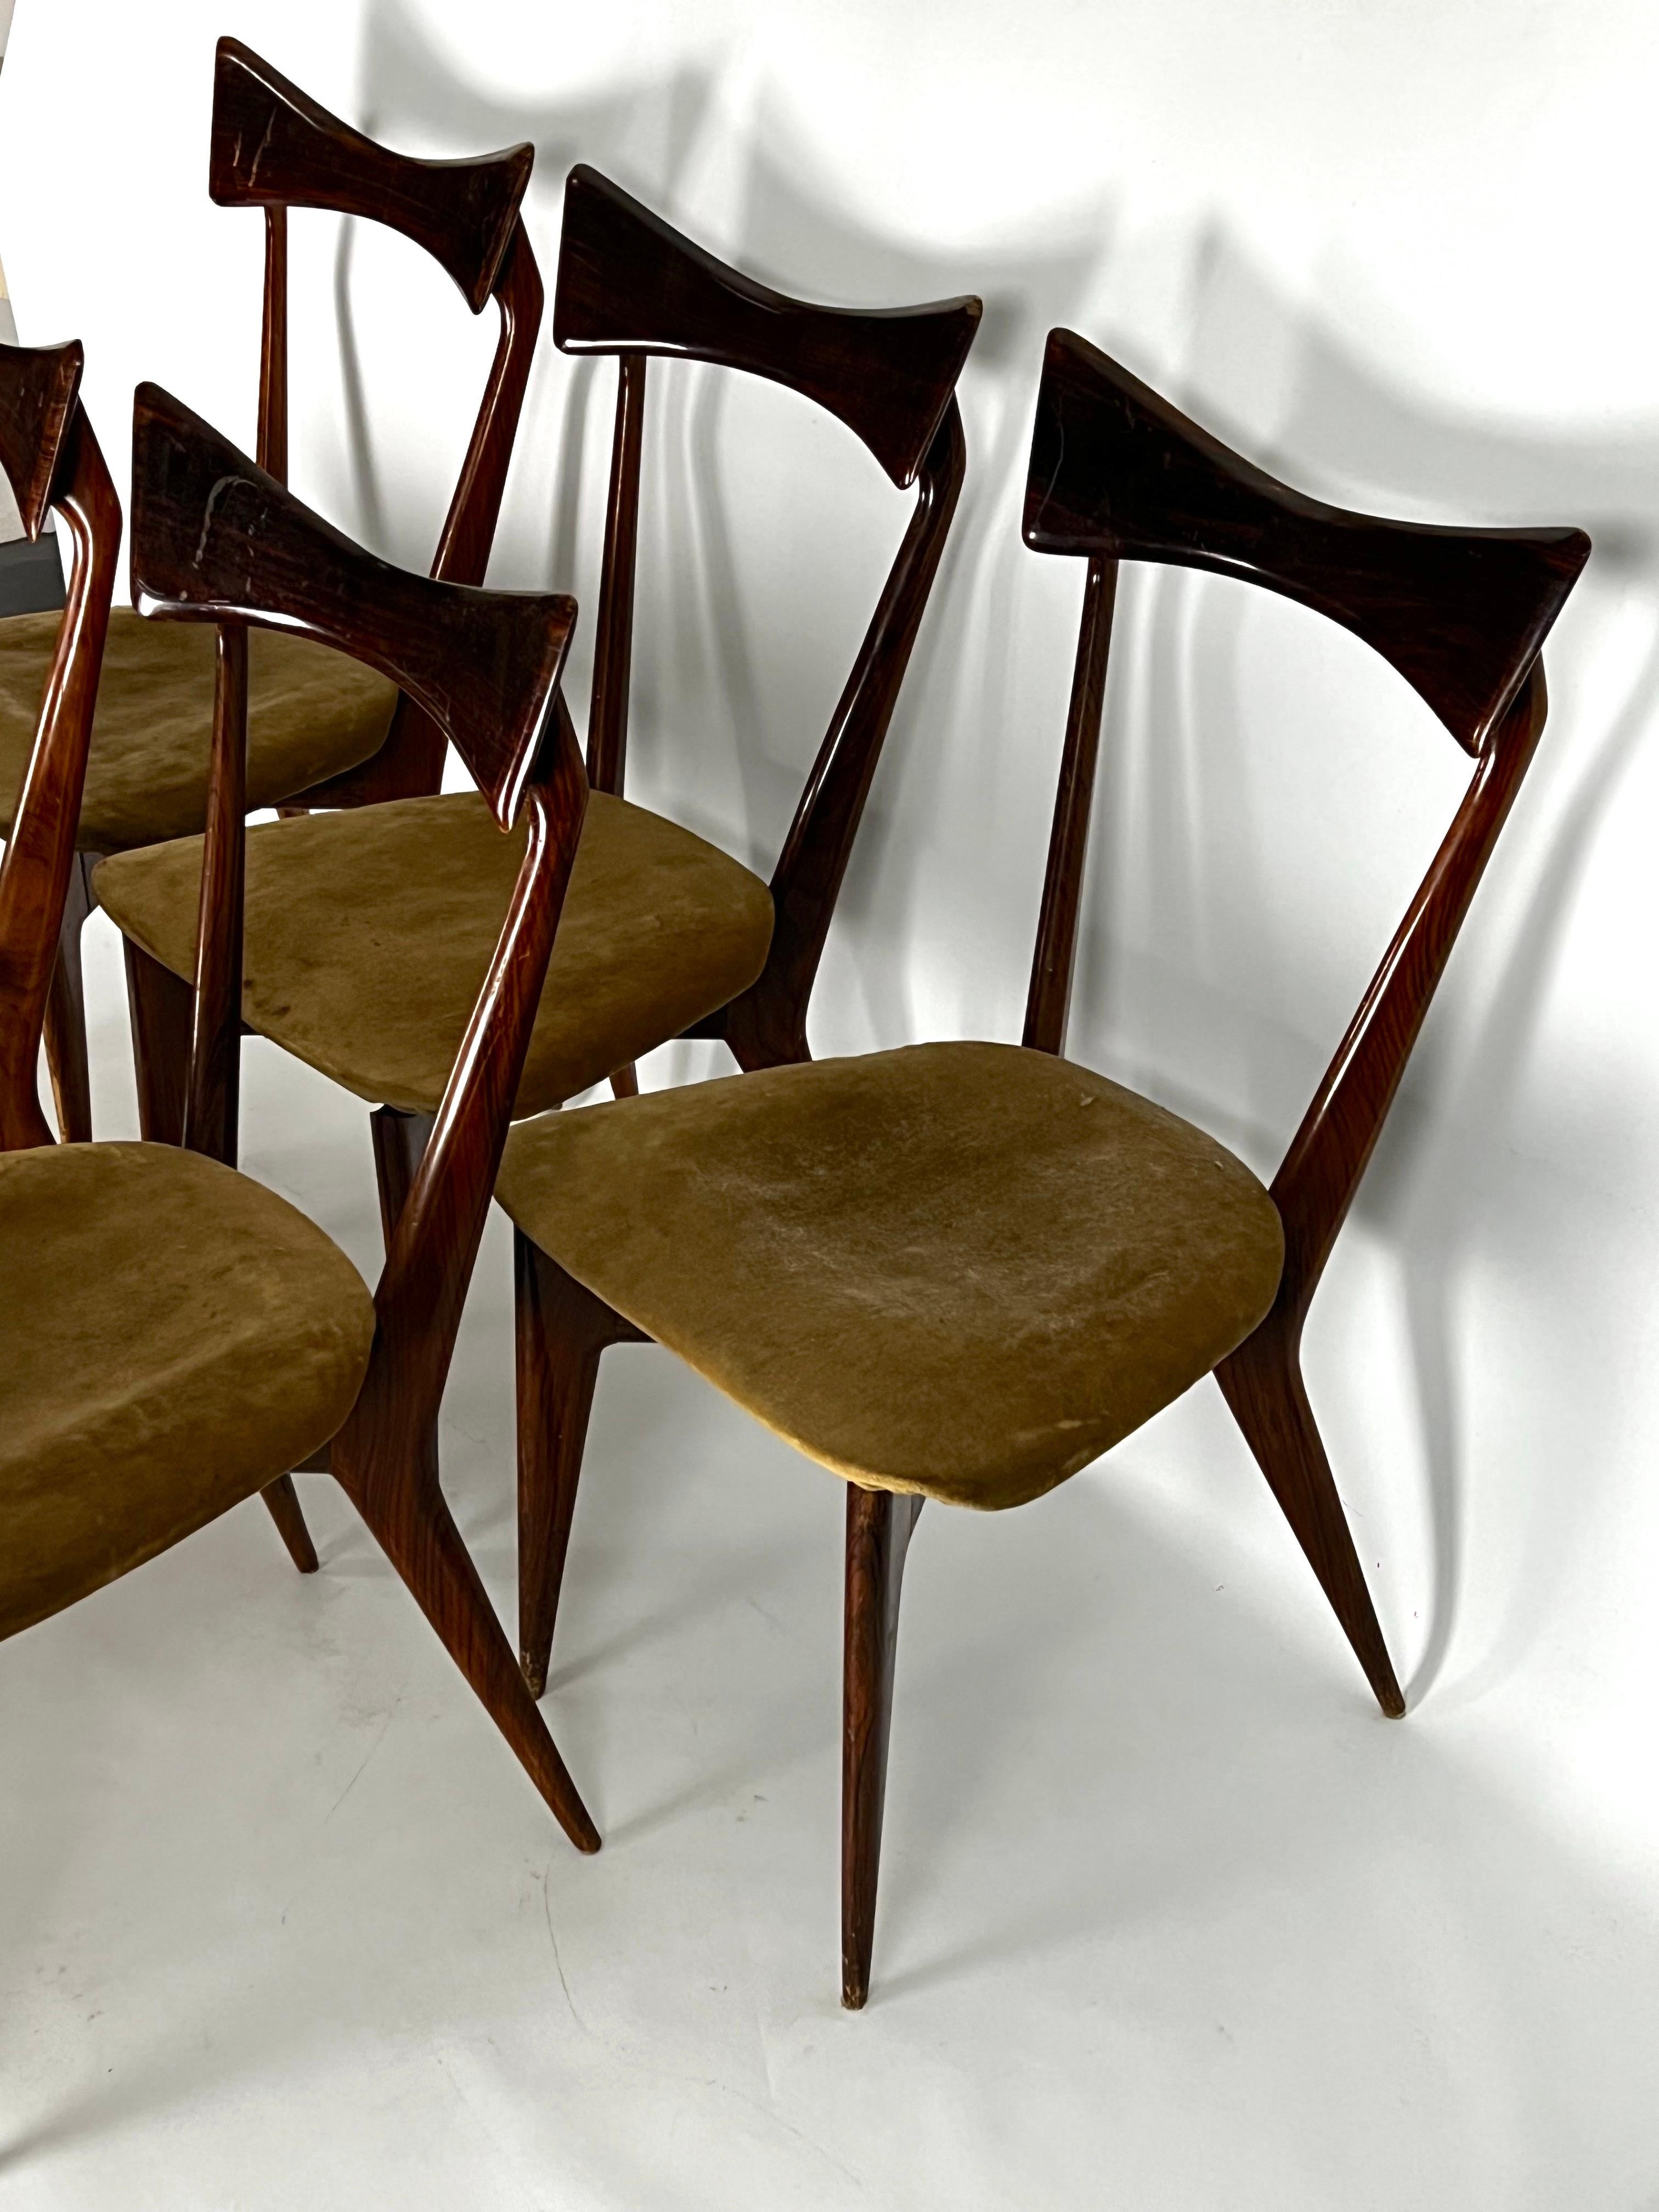 Italian Ico Parisi, set of five Butterfly chairs for Ariberto Colombo. Italy 1950s